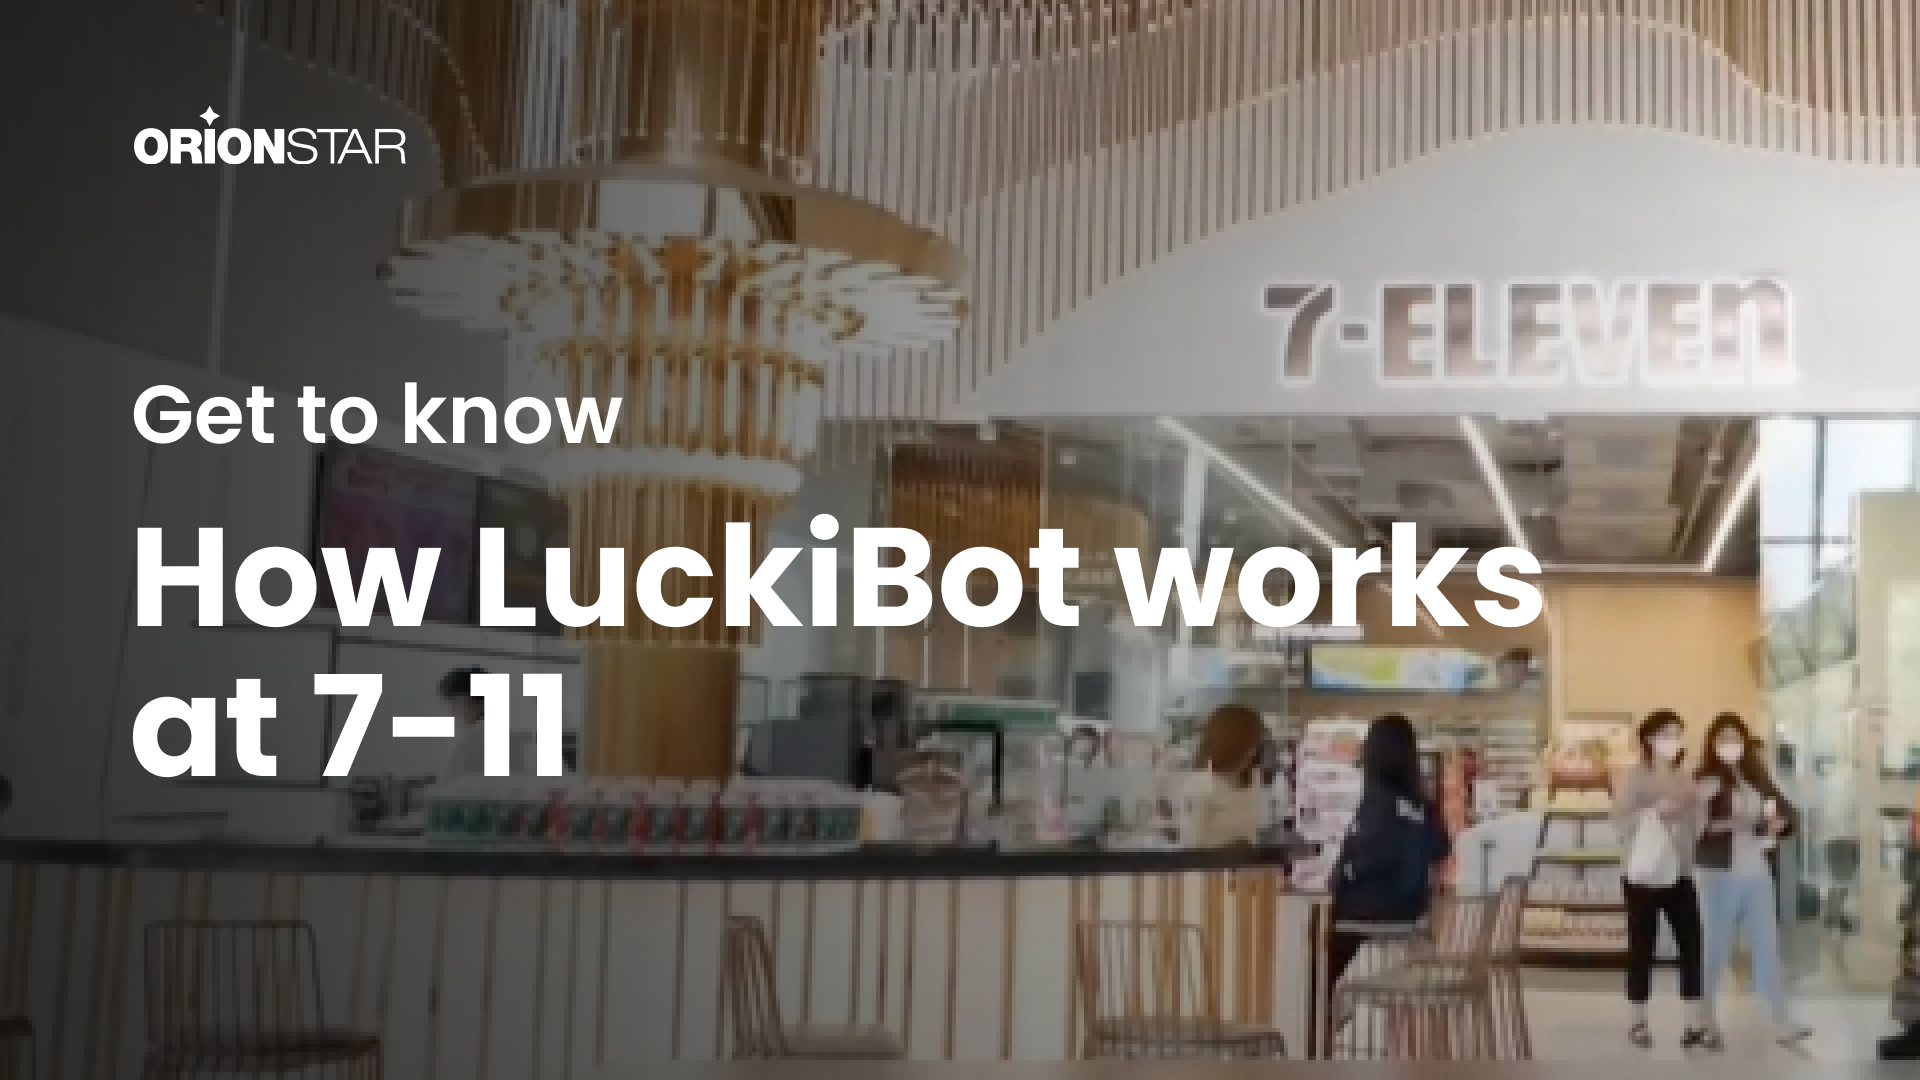 Do you want to know how LuckiBot works at 7-11?